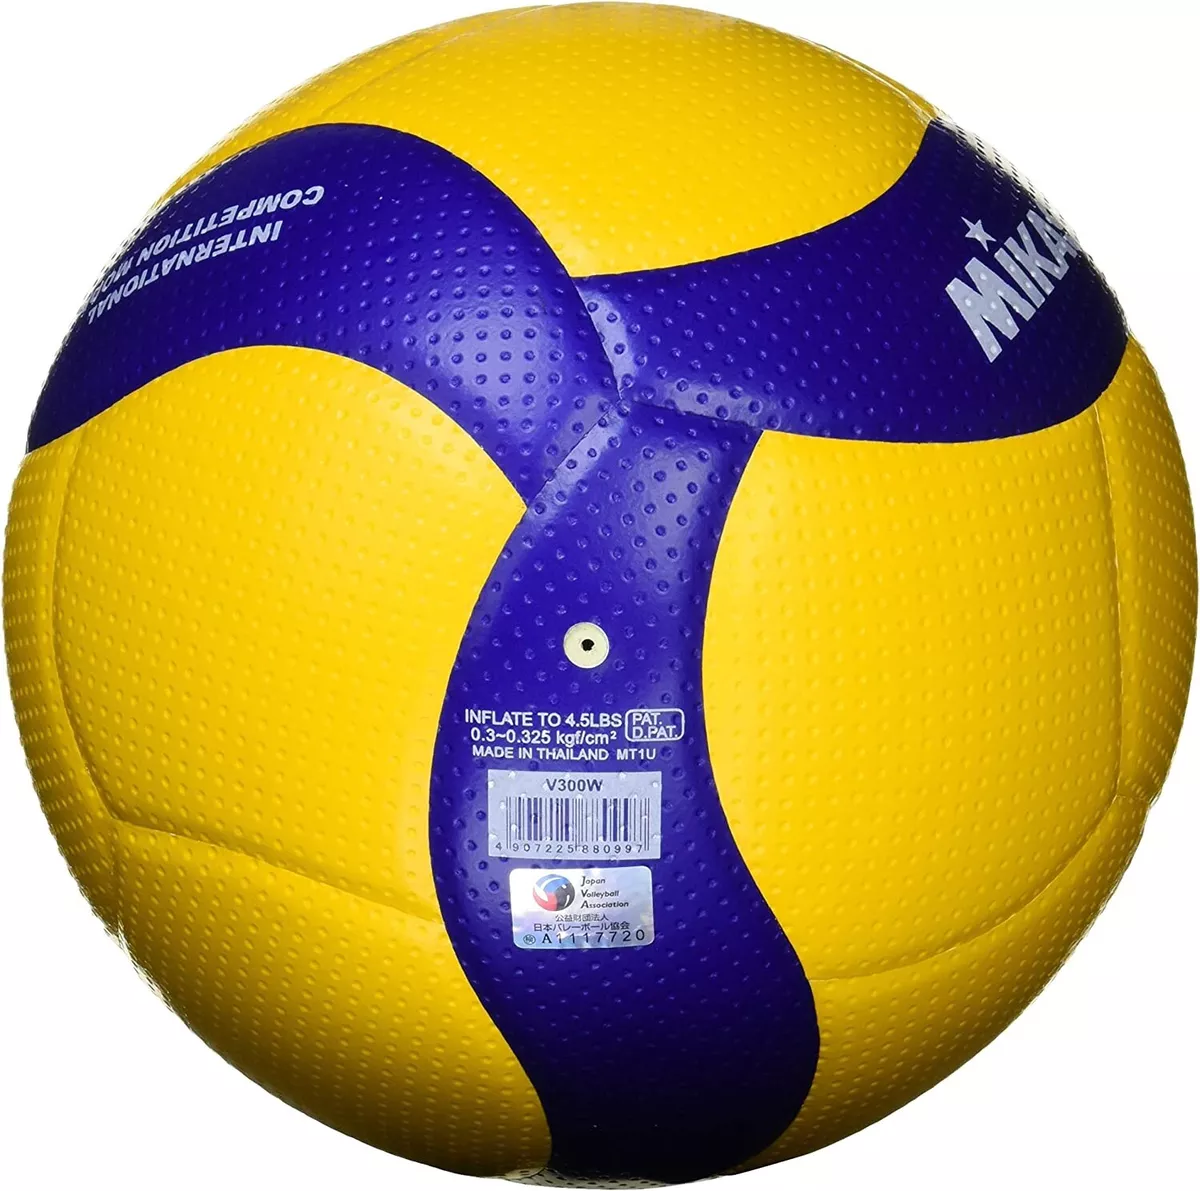 MIKASA V300W-V FIVA Official Volleyball Competition Ball size:5